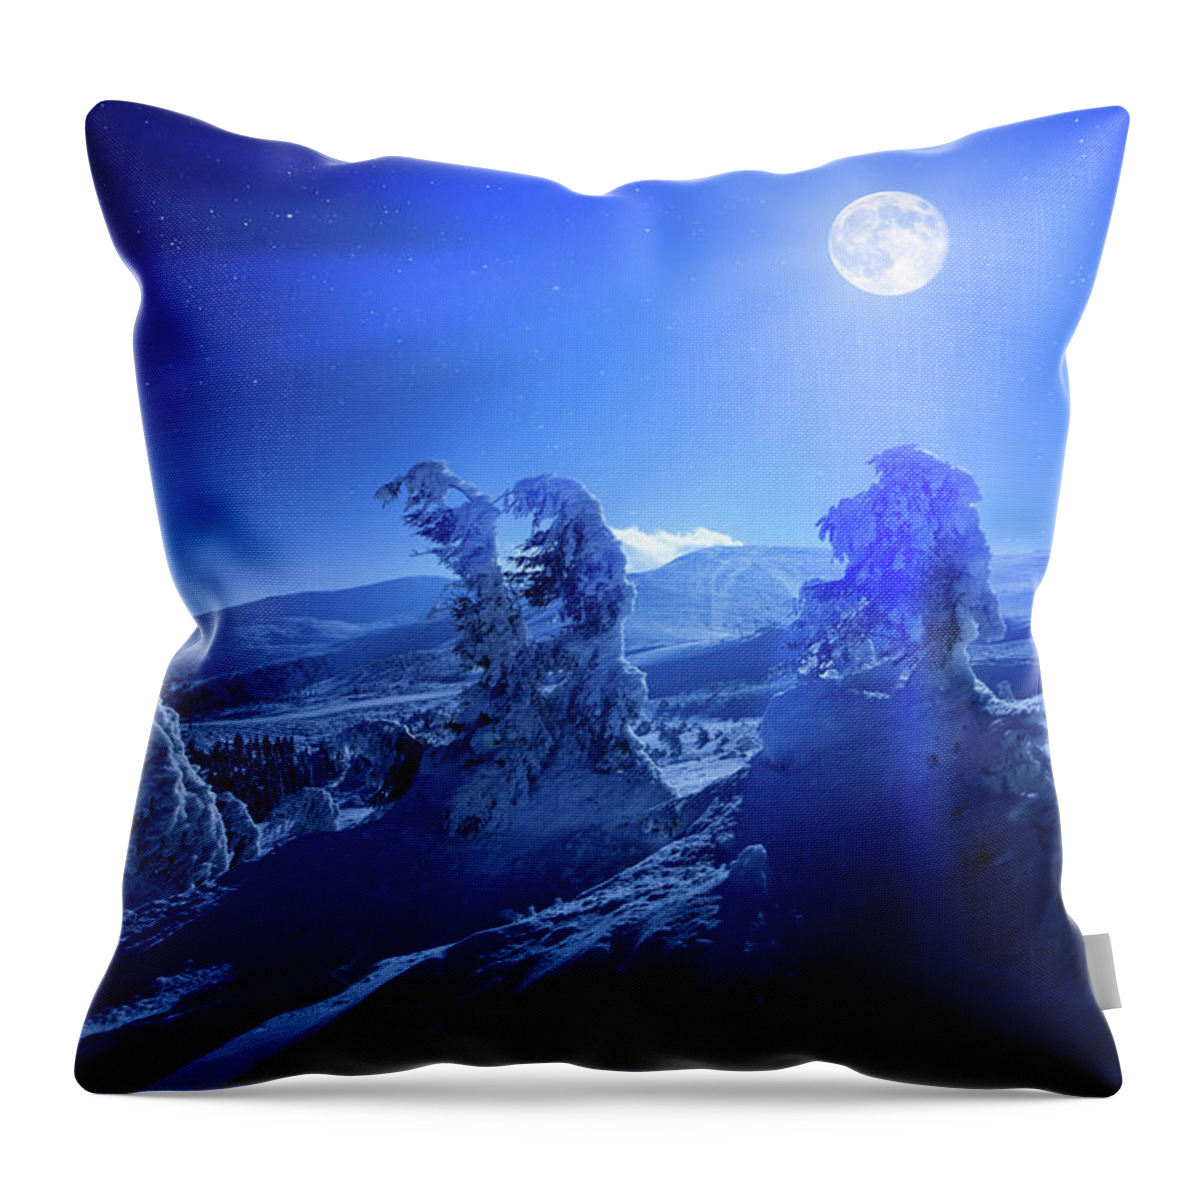 Cool Attitude Throw Pillow featuring the photograph Winter Moon by Yourapechkin